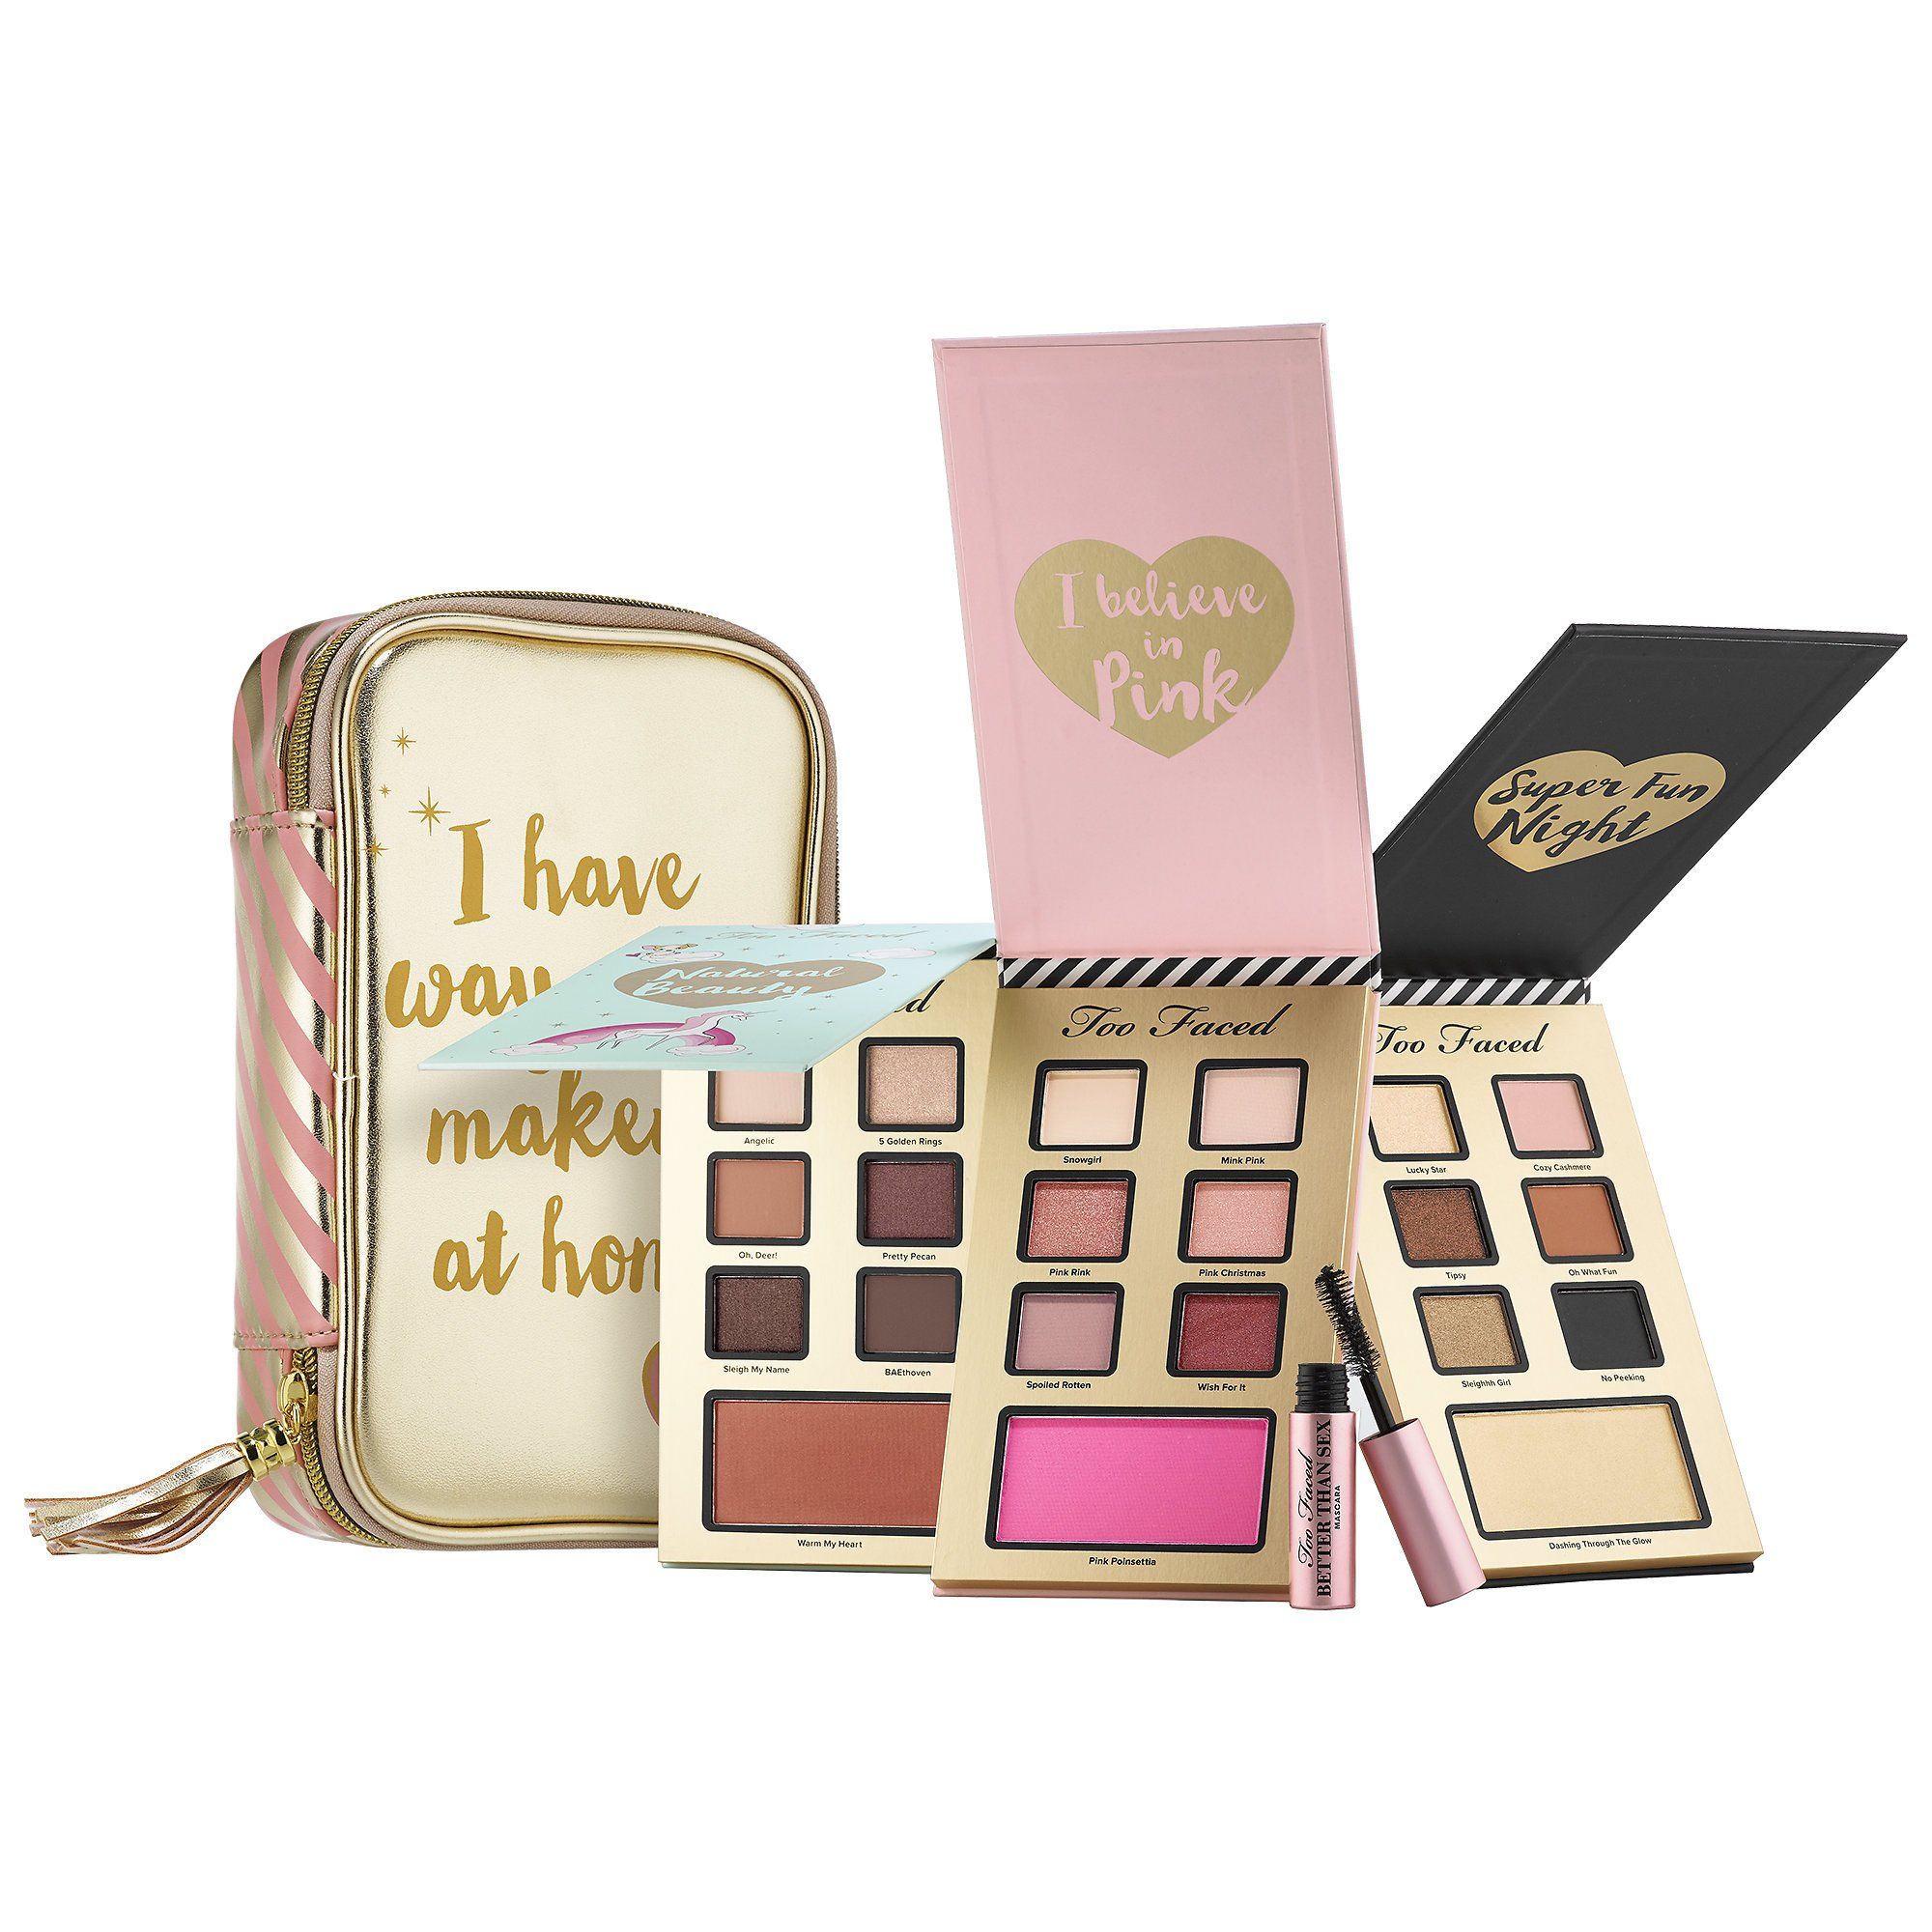 Where to buy too faced makeup